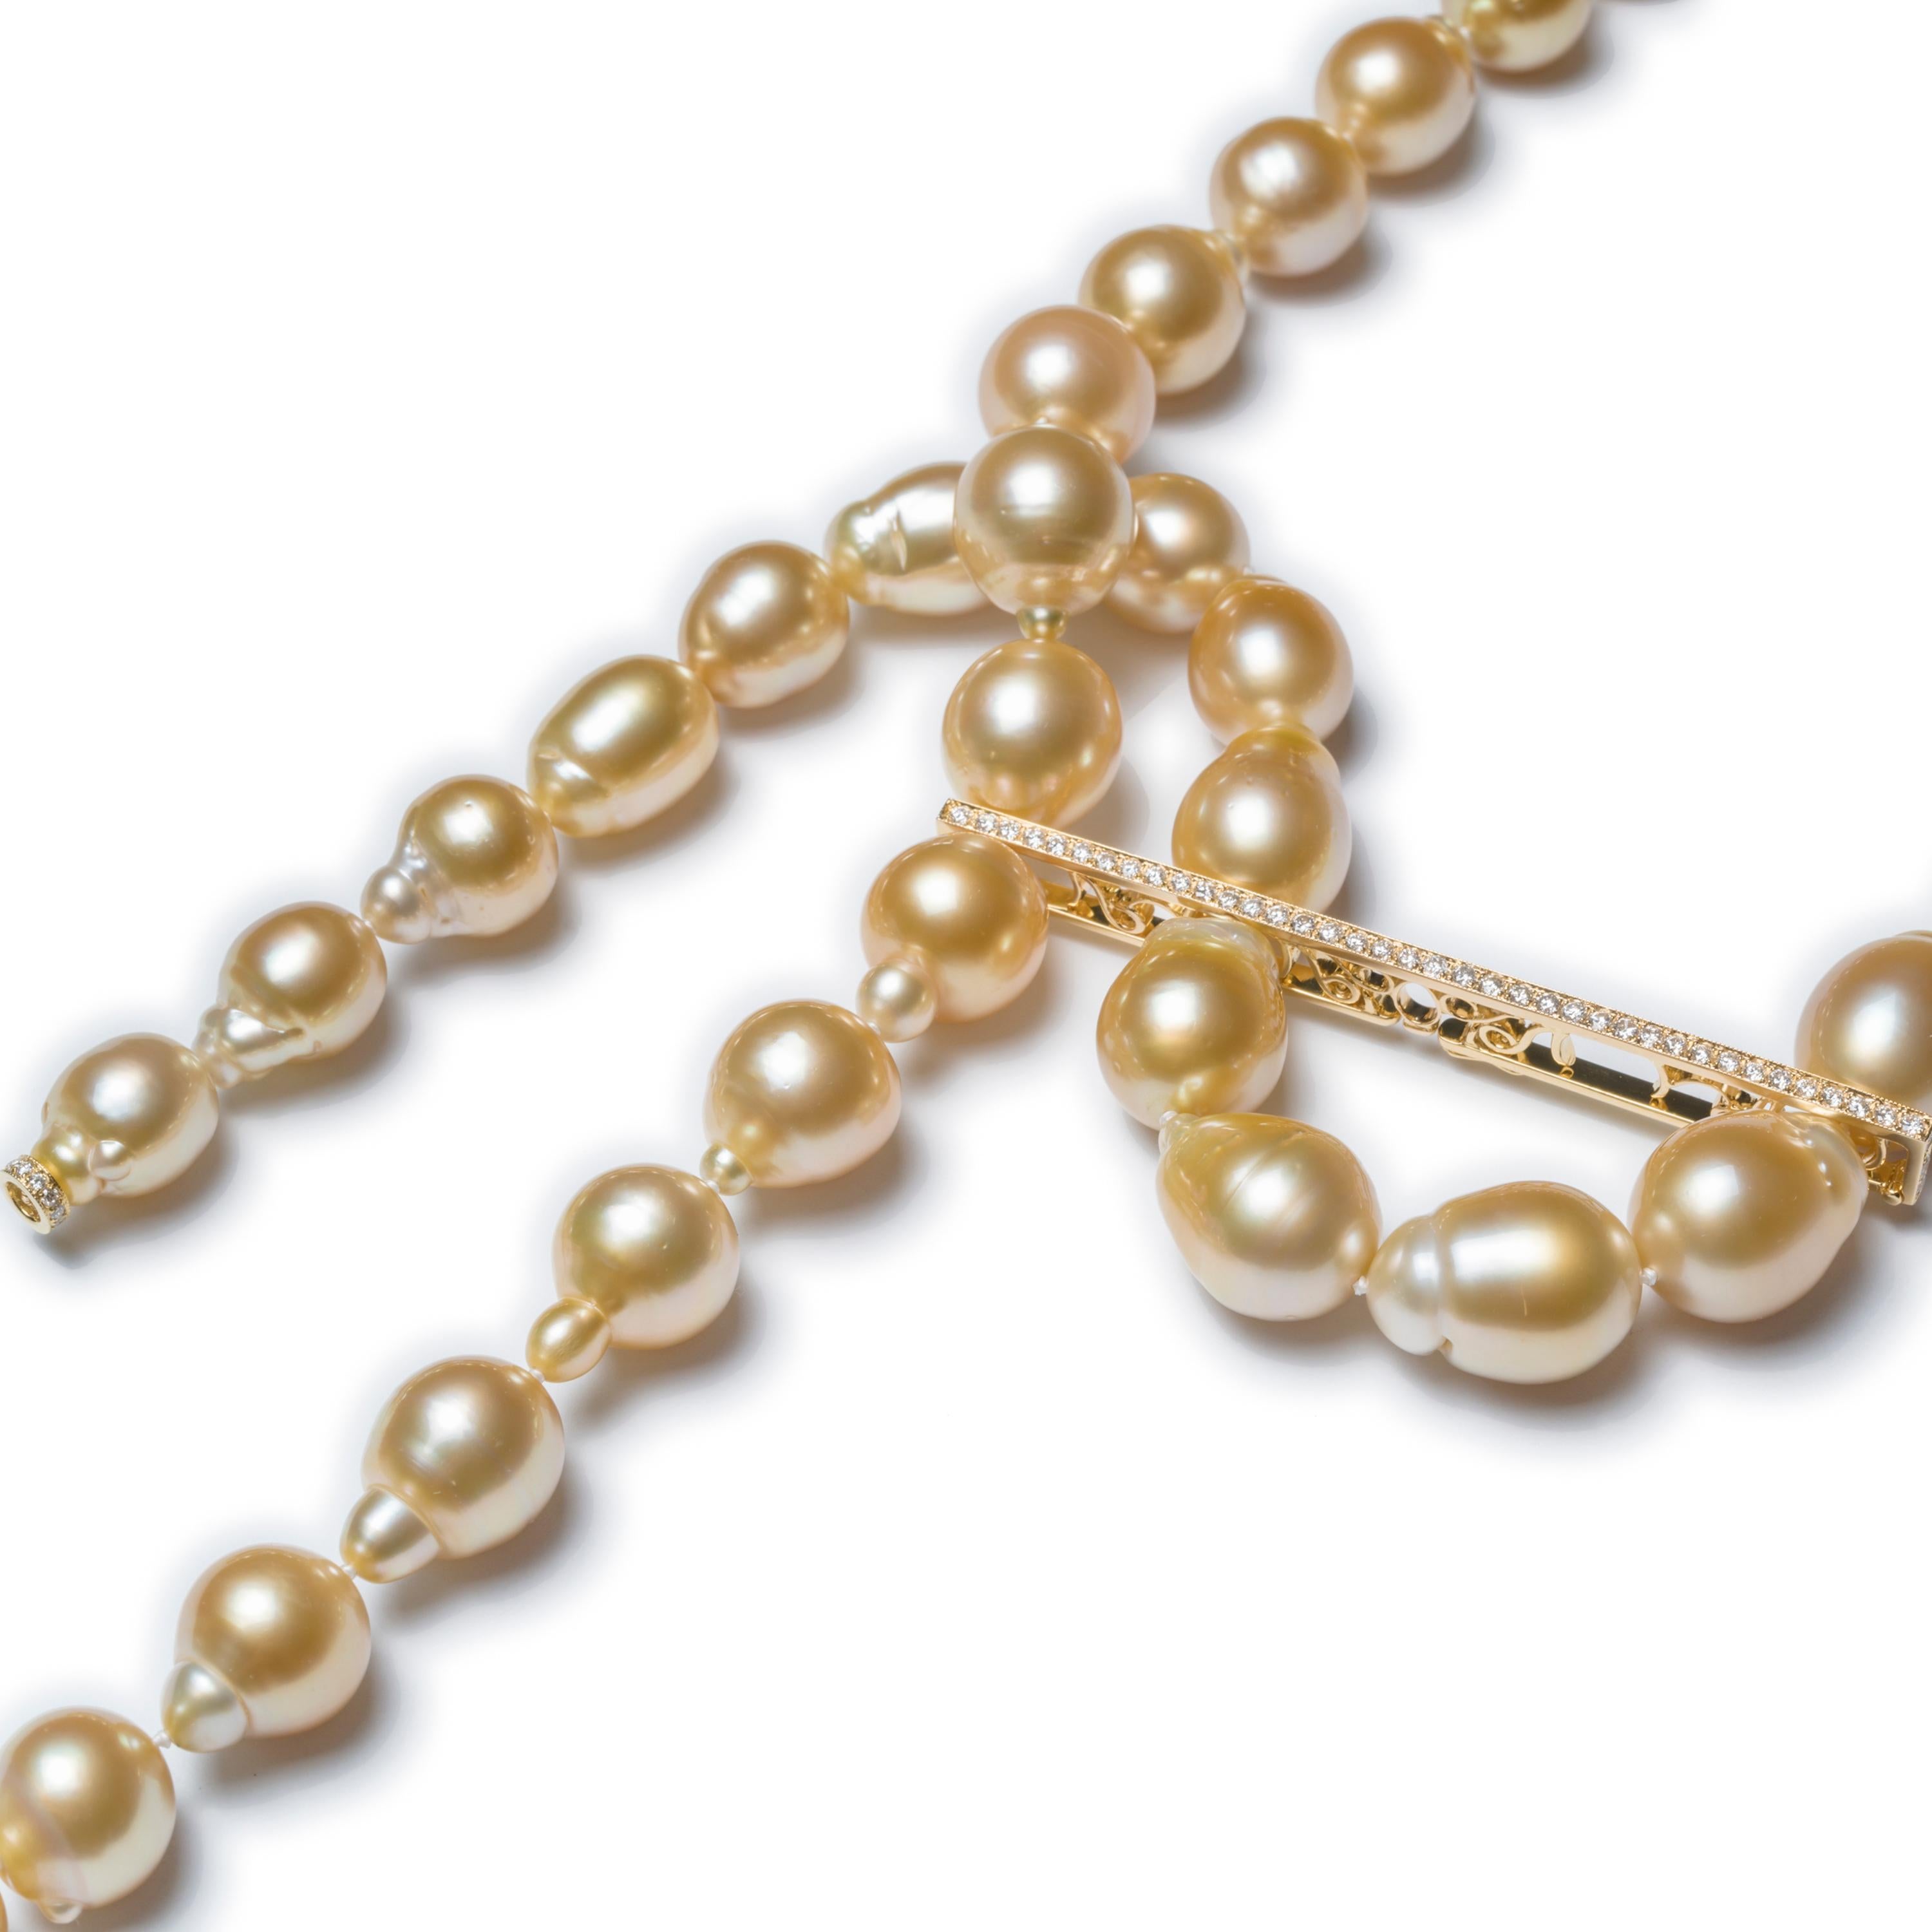 Collection: The Gem Made Me Do It  

Title:  Freestyle Baroque Pearl Necktie


These 50 Baroque Pearls in their quirky shapes wanted to stay true to their unique selves and begged to be a freestyle necktie.  So we designed a diamond bar to allow it